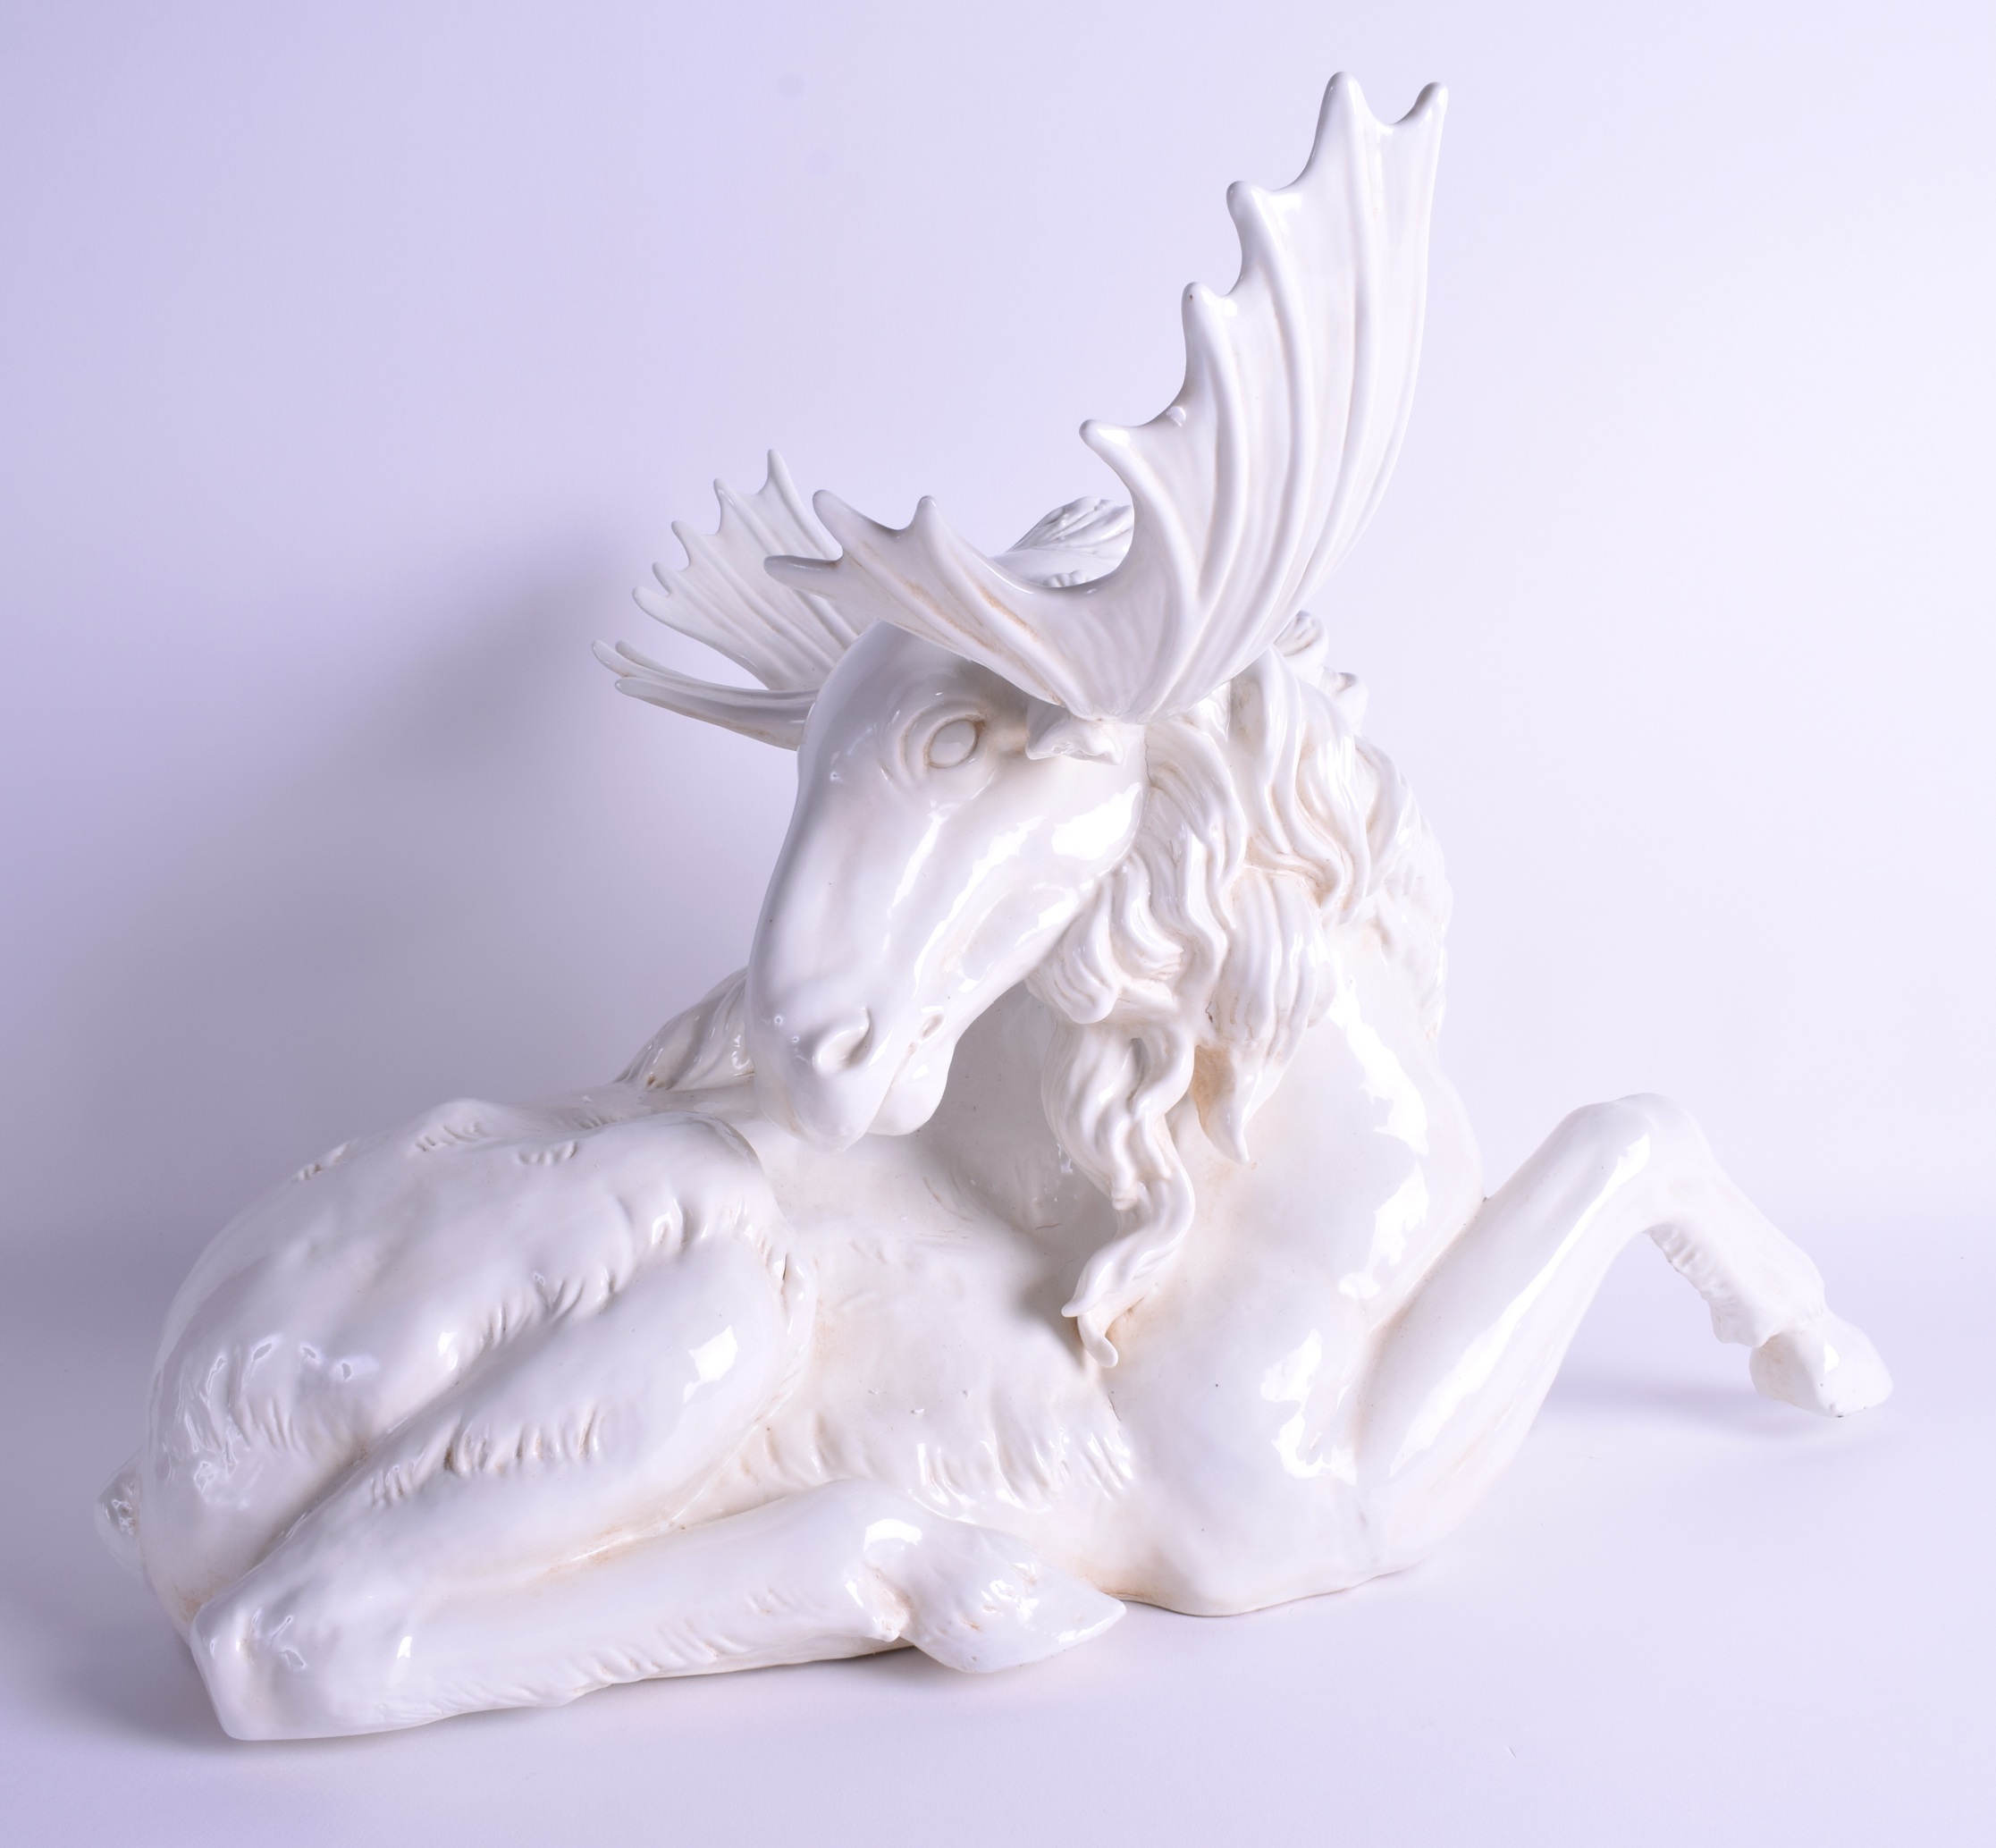 A LARGE CONTINENTAL PORCELAIN GROUP OF A RECUMBANT MOOSE modelled with its head turned. 52 cm x 37 c - Image 2 of 4